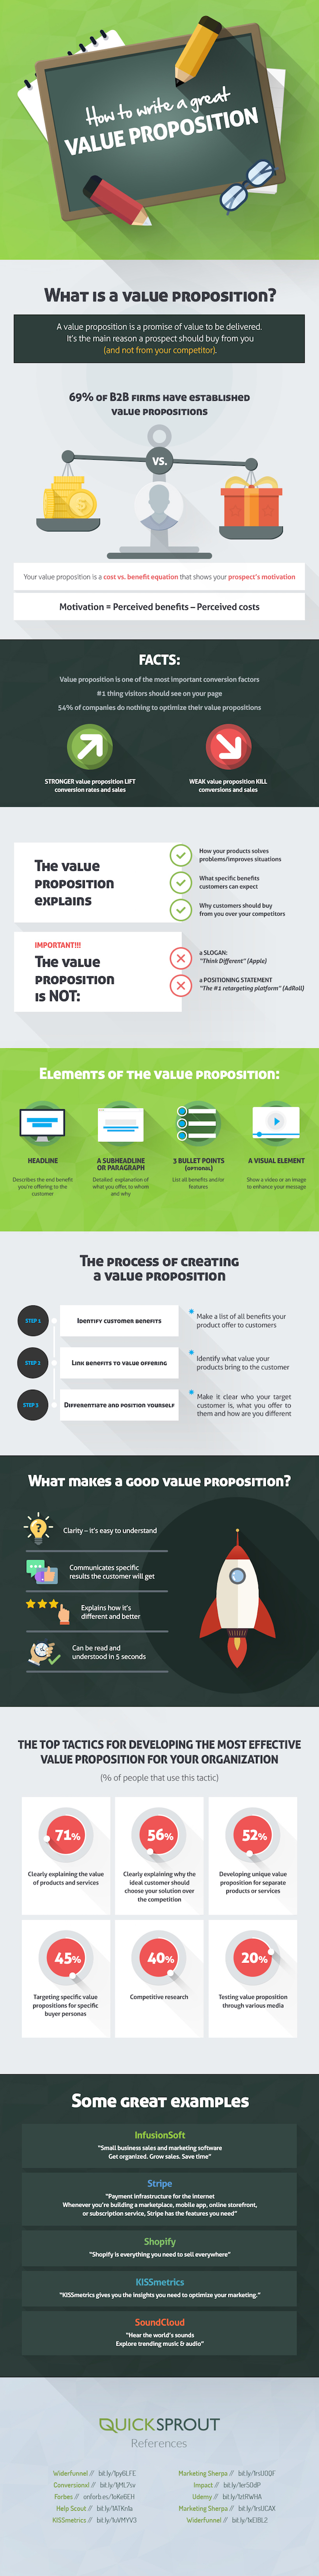 value-prop-infographic